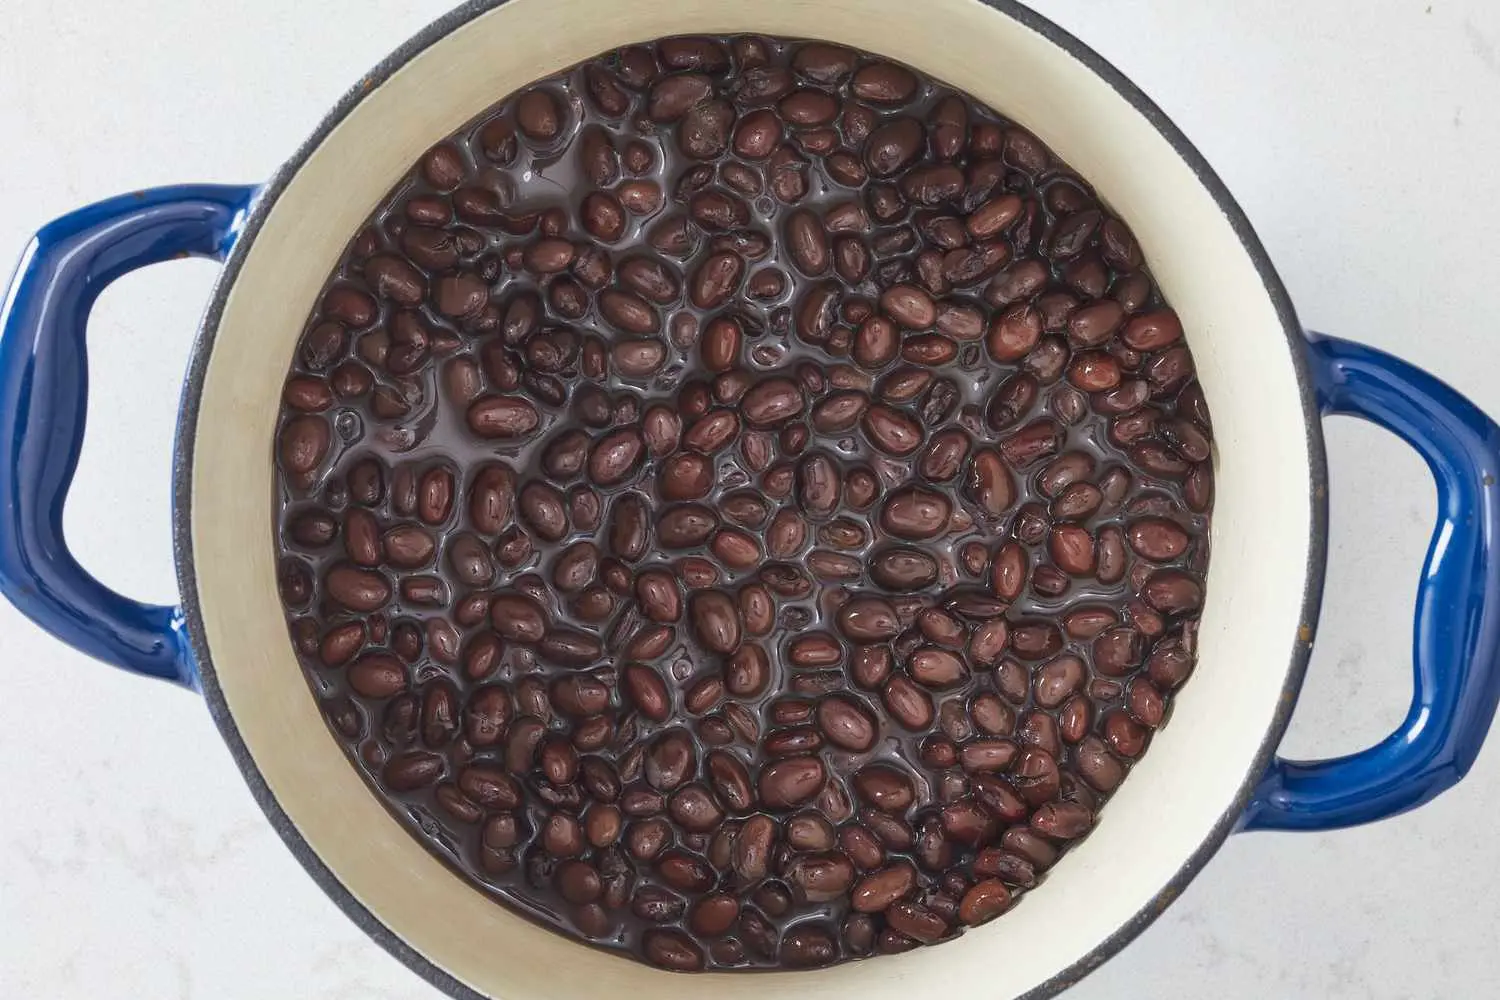 smoked black beans - Should you soak black beans before cooking